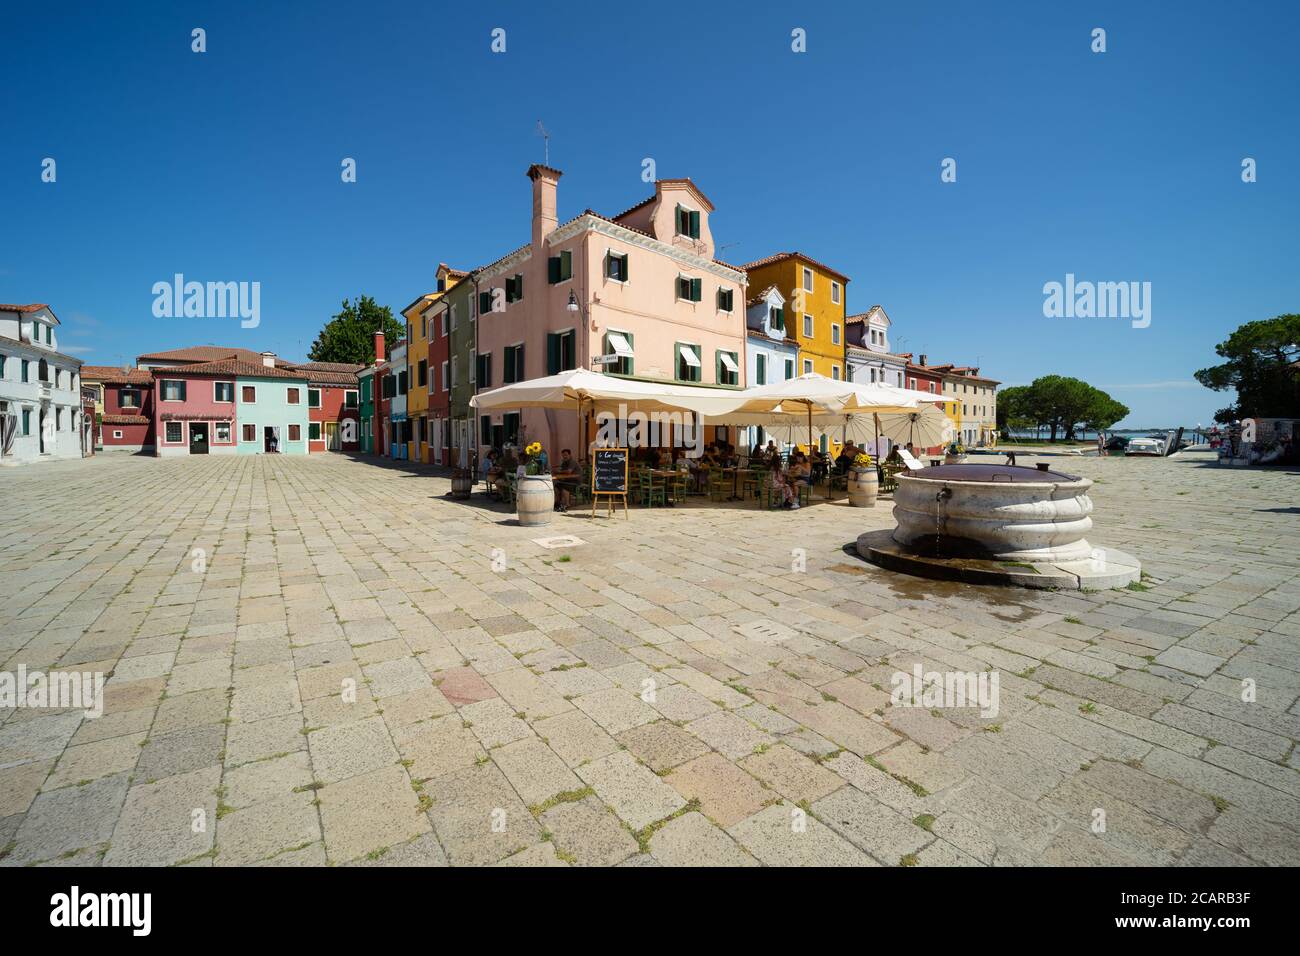 Burano island, Venetian Lagoon, Venice, Italy, Piazza Galuppi square in the town historic centre with ancient water wall Stock Photo